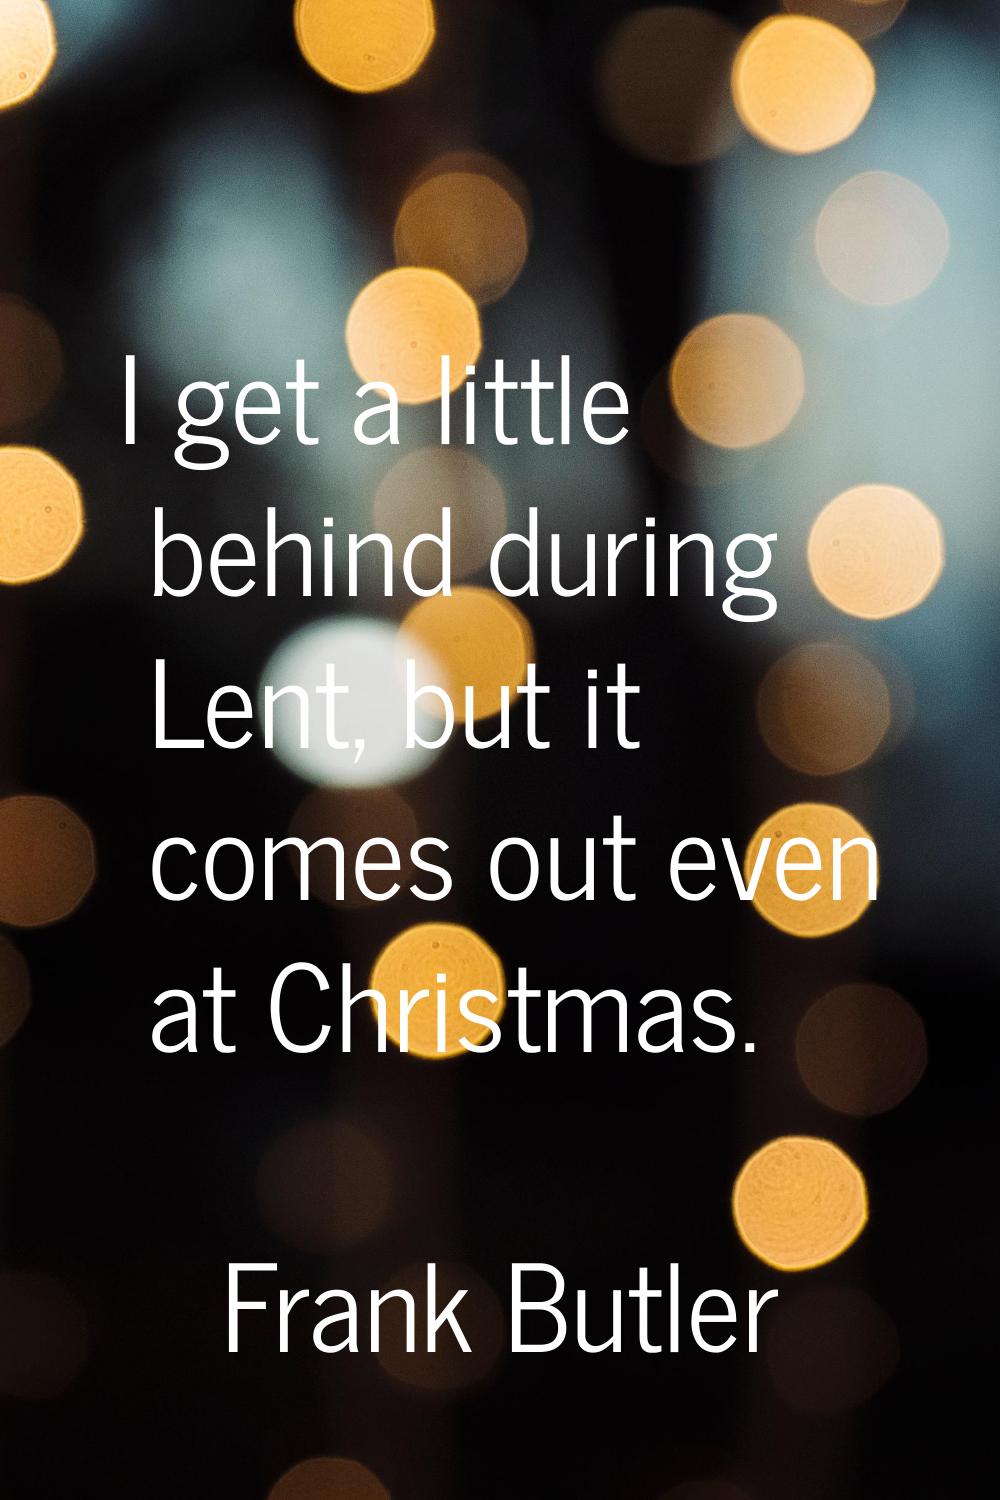 I get a little behind during Lent, but it comes out even at Christmas.